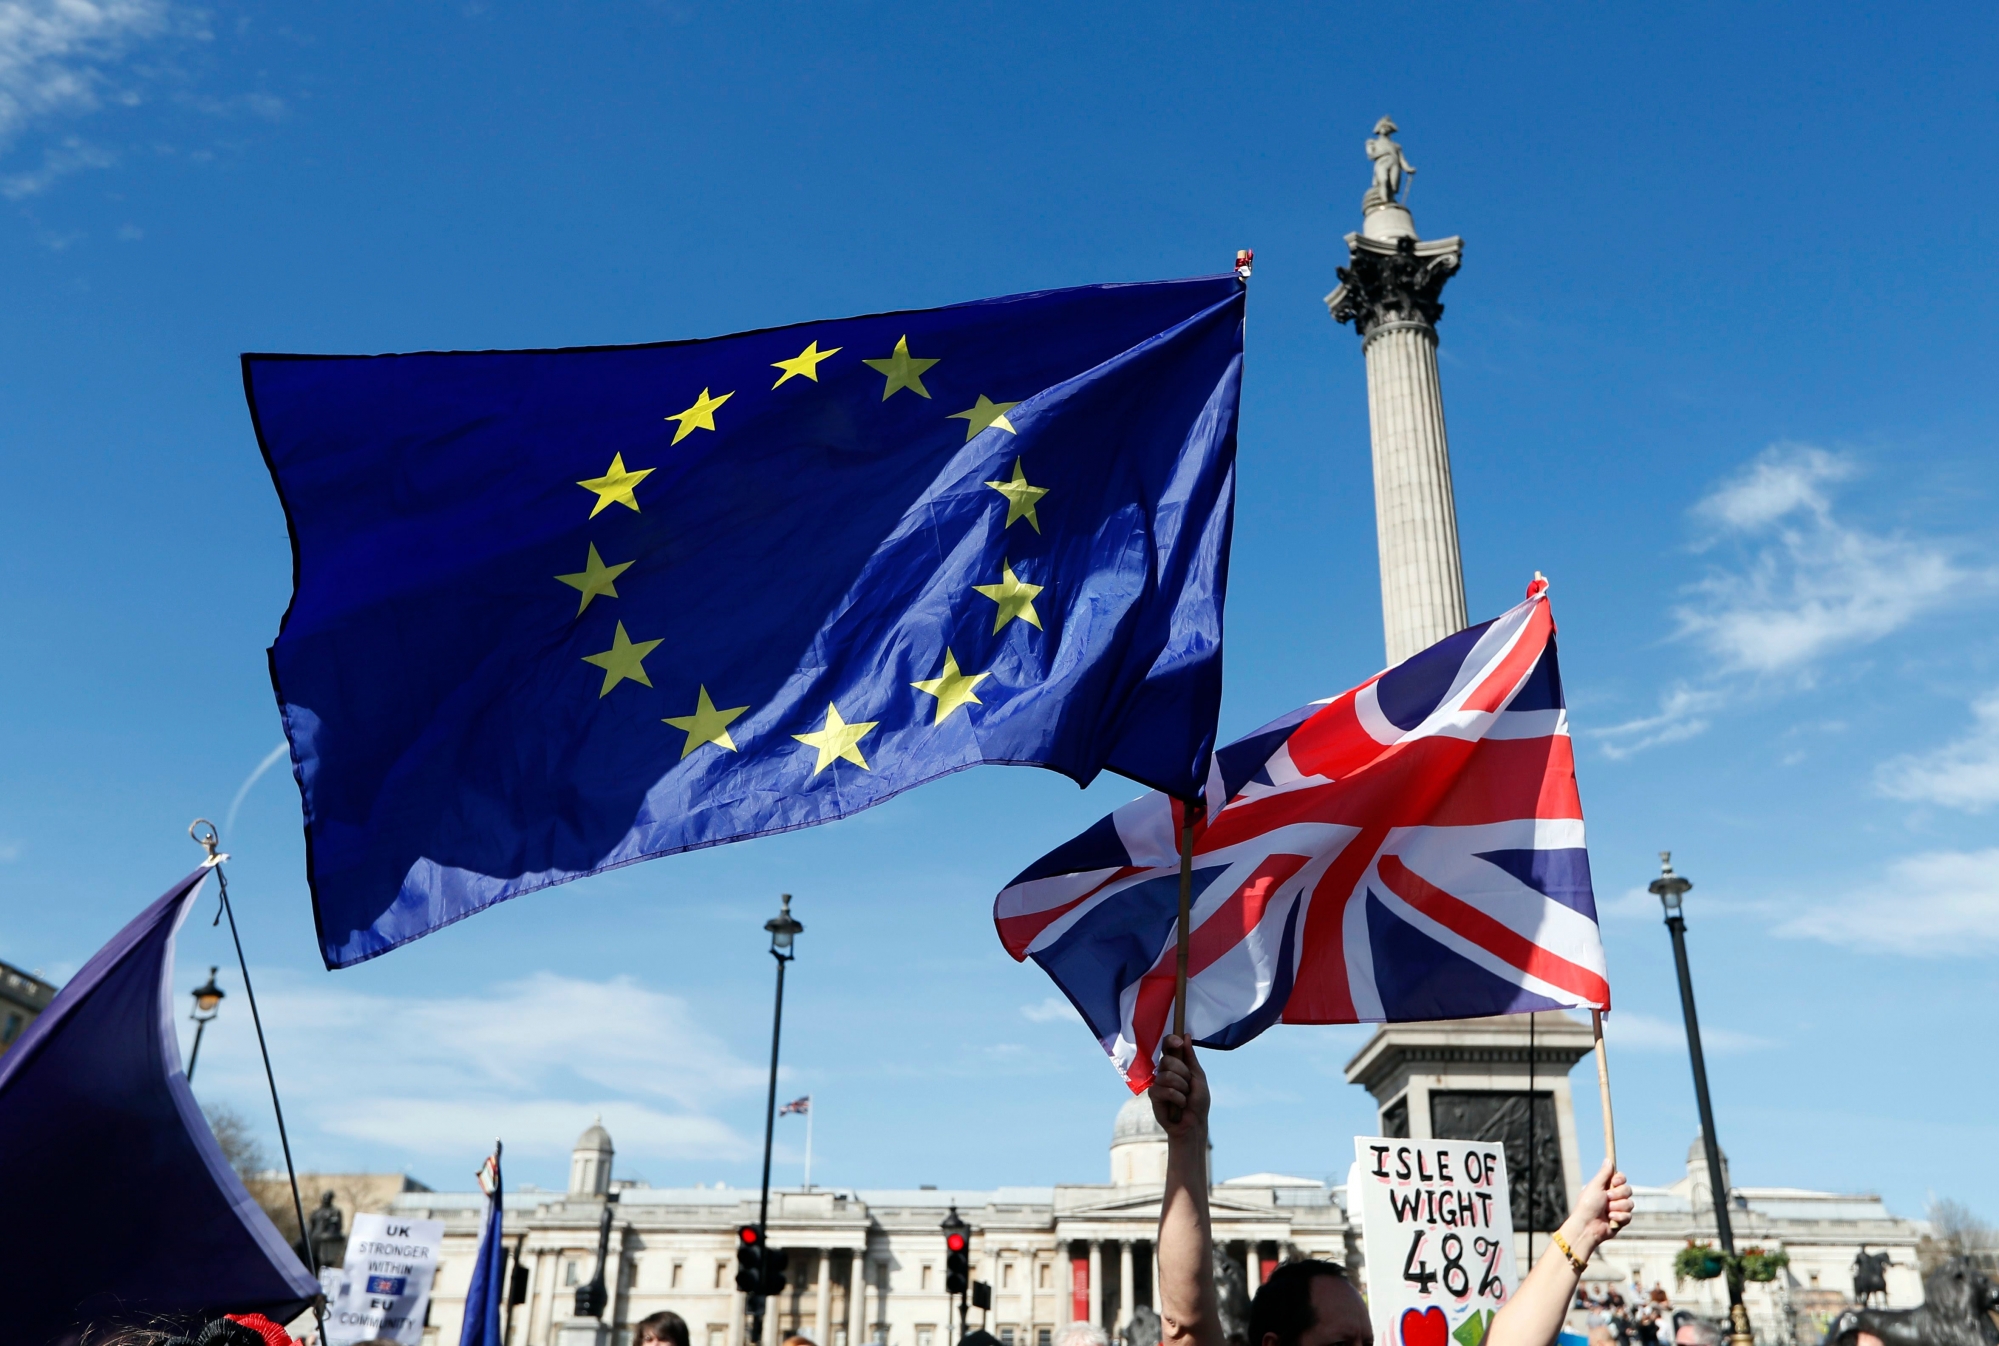 The European flag and the United Jack flag are held by Anti Brexit campaigners walking past Nelson's Column in Trafalgar Square towards Britain's parliament in London, Saturday March 25, 2017. Britain's Prime Minister Theresa May is expected to start the process of leaving the European Union on Wednesday March 29. (AP Photo/Kirsty Wigglesworth) Britain Brexit